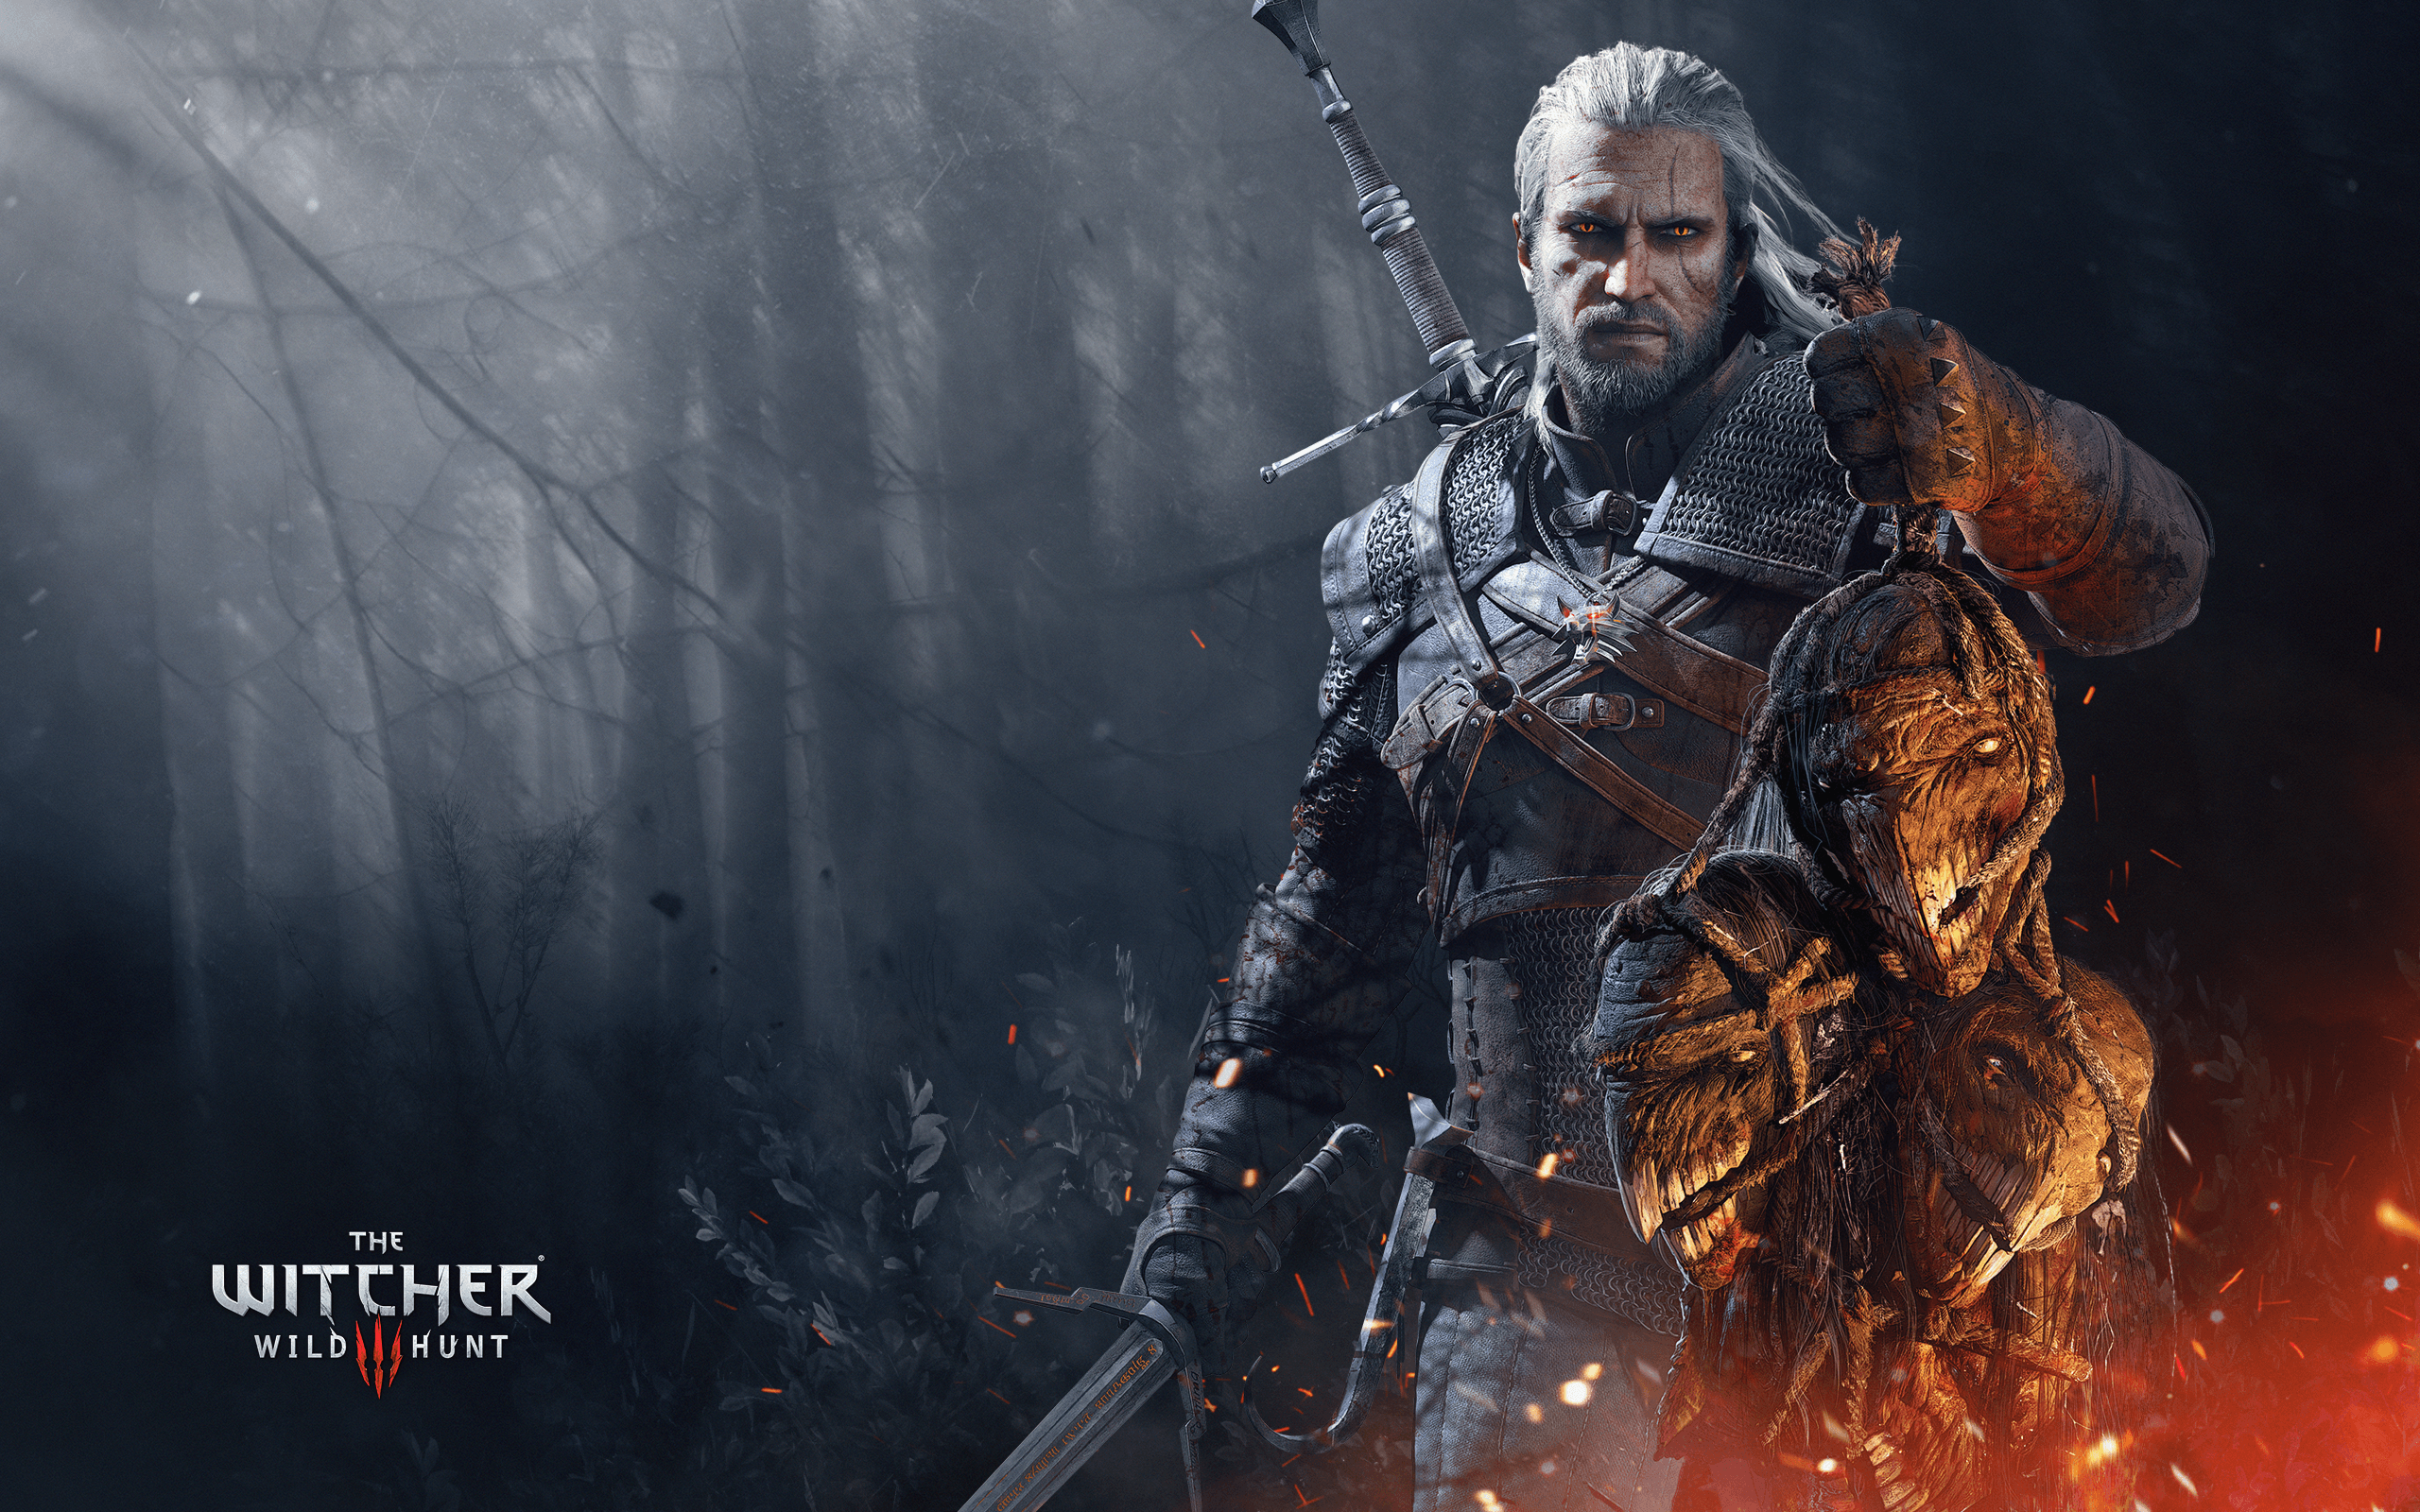 The Witcher 3 Wild Hunt Wallpapers  Top 18 Best The Witcher 3 Wild Hunt  Wallpapers  HQ 